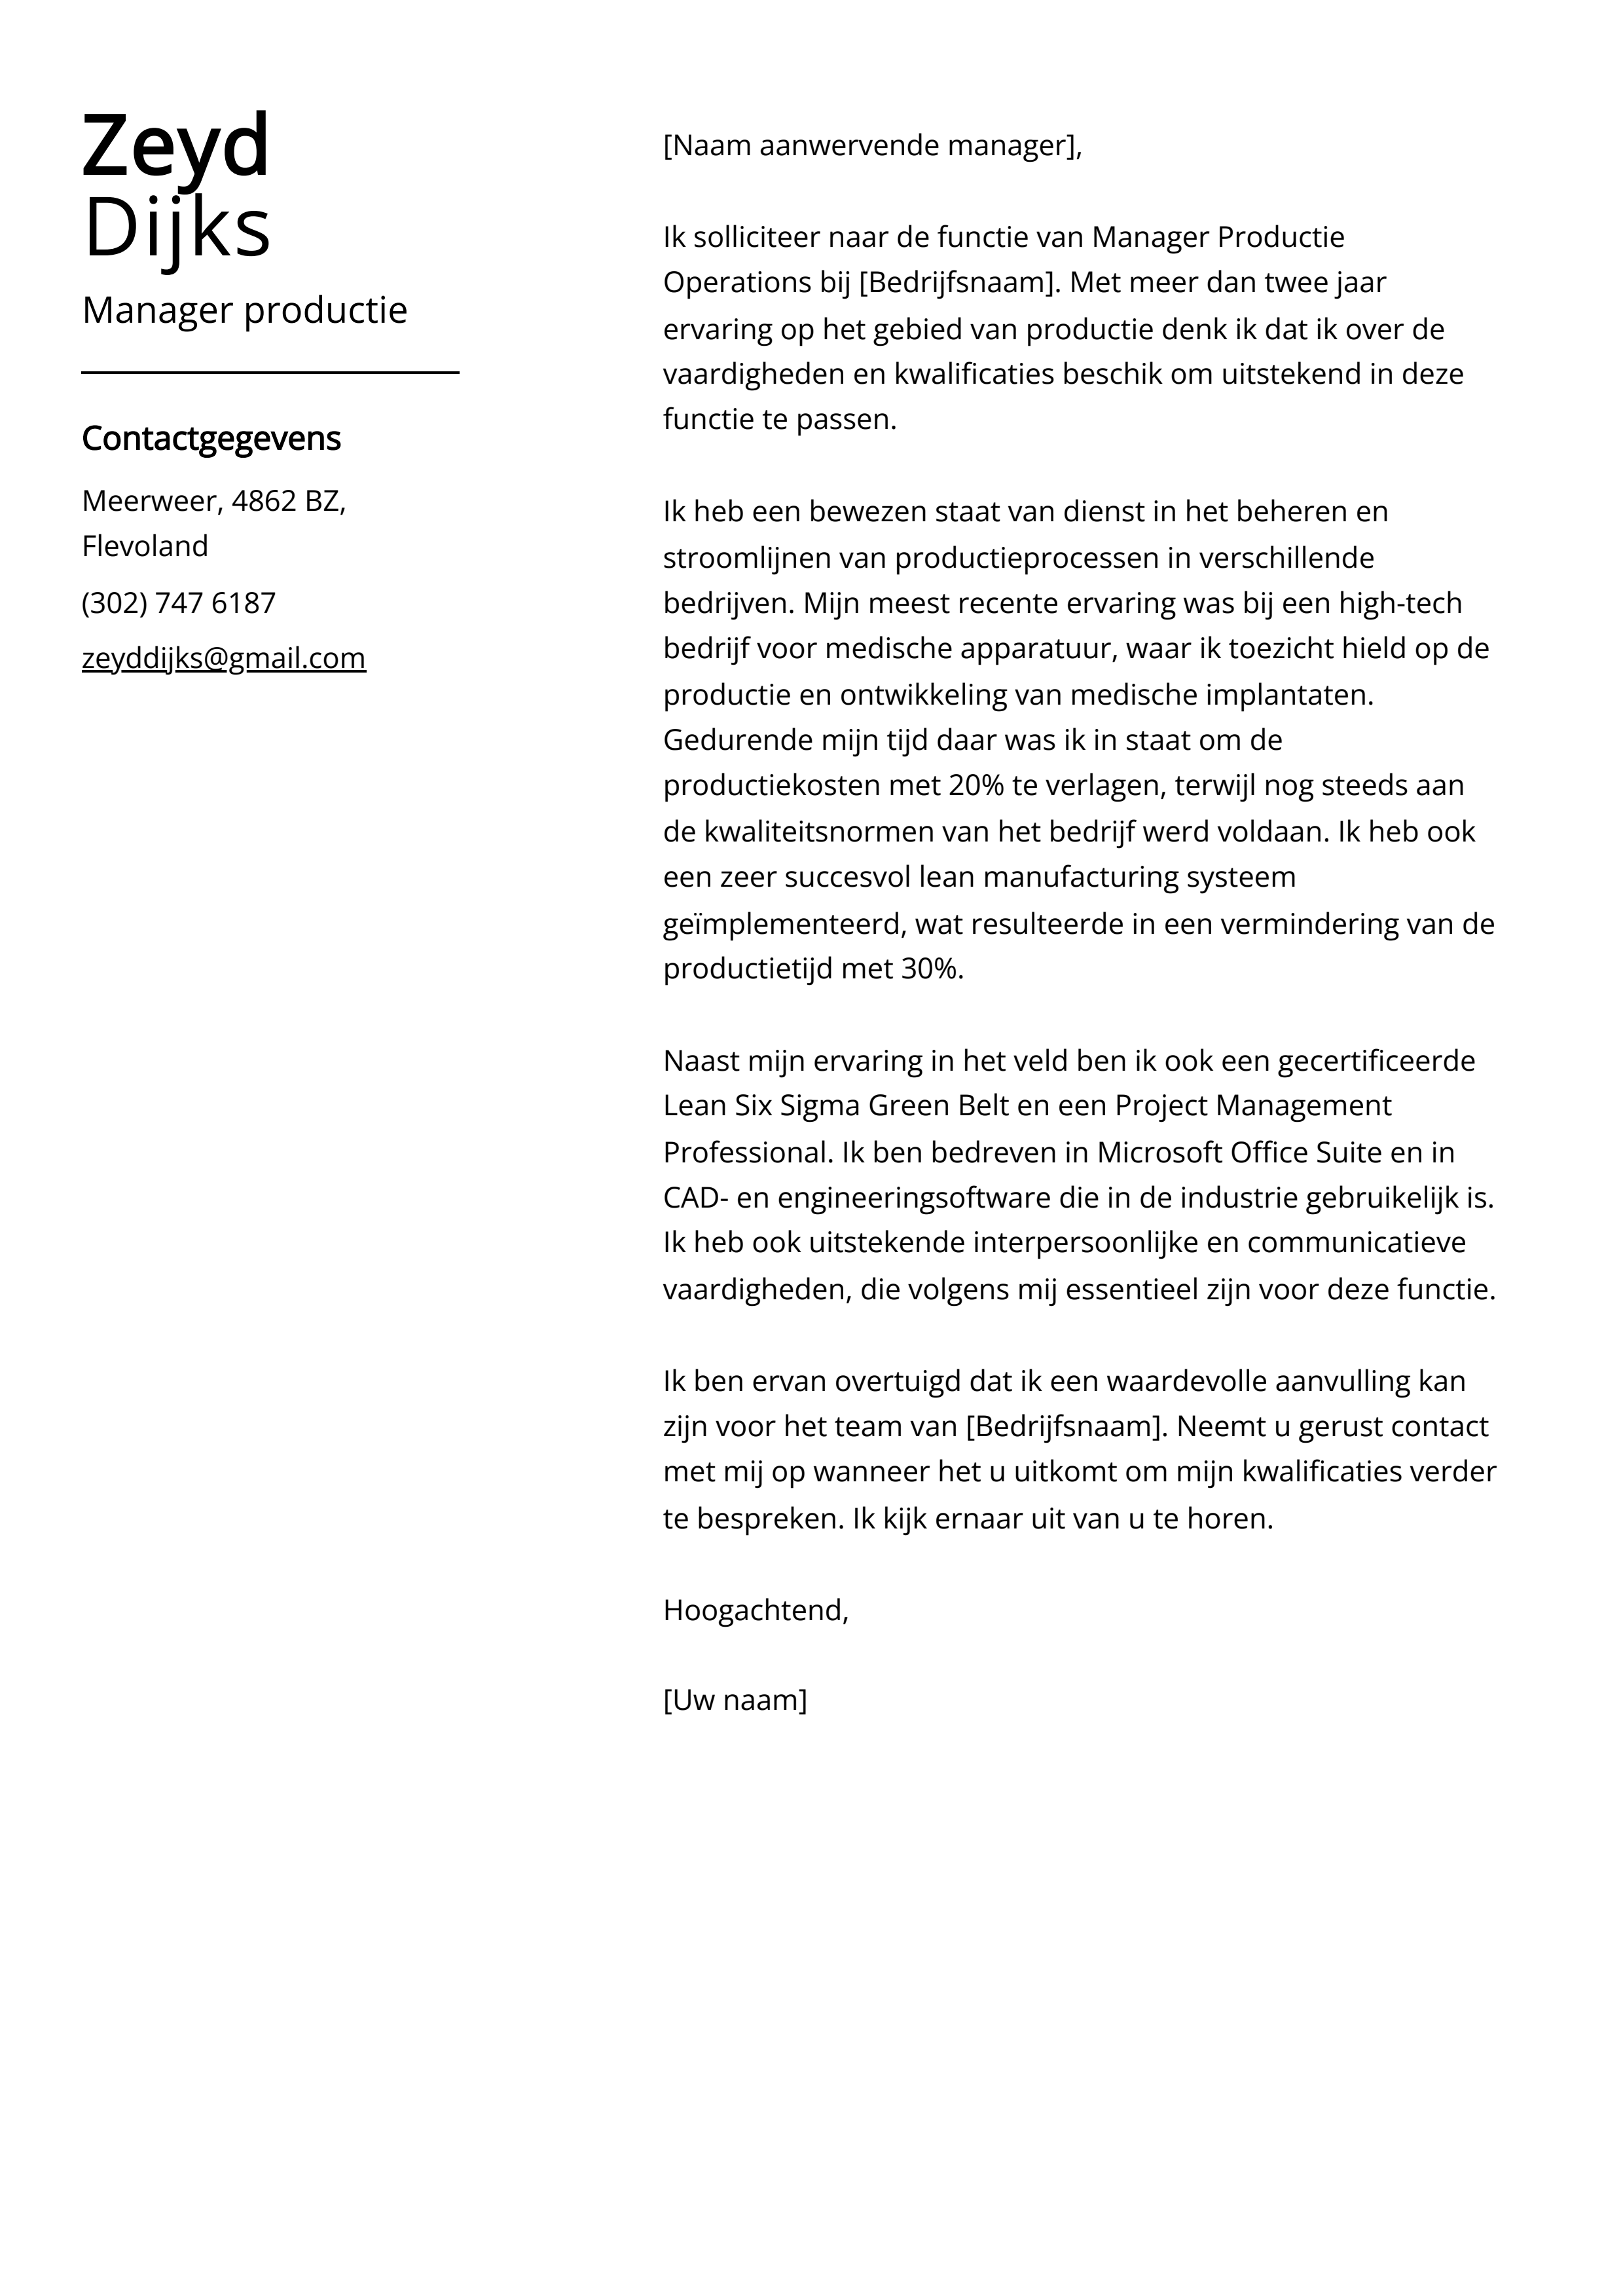 Manager productie Cover Letter Voorbeeld